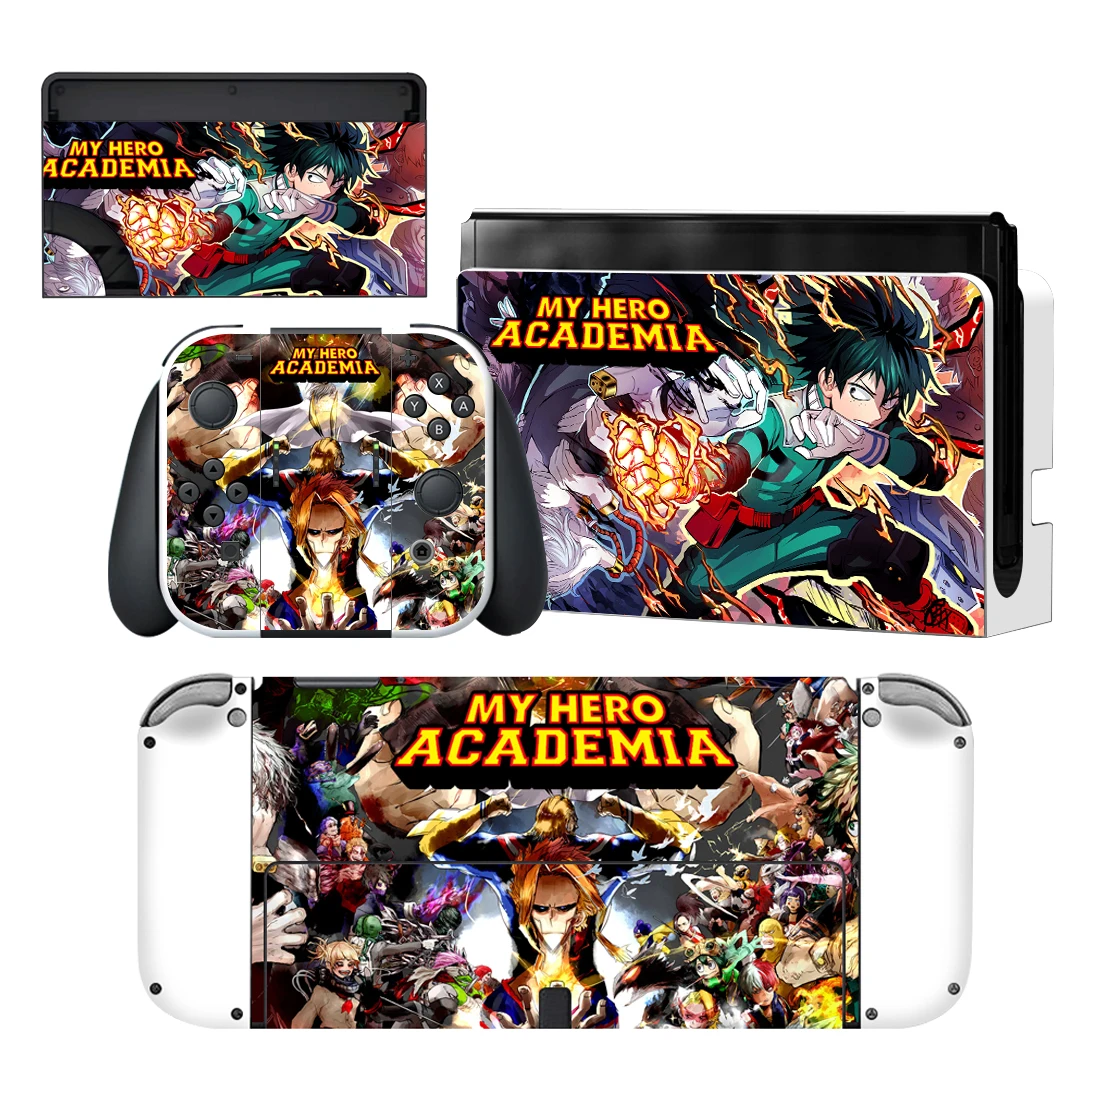 

My Hero Academia Nintendoswitch Skin Cover Sticker Decal for Nintendo Switch OLED Console Joy-con Controller Dock Vinyl